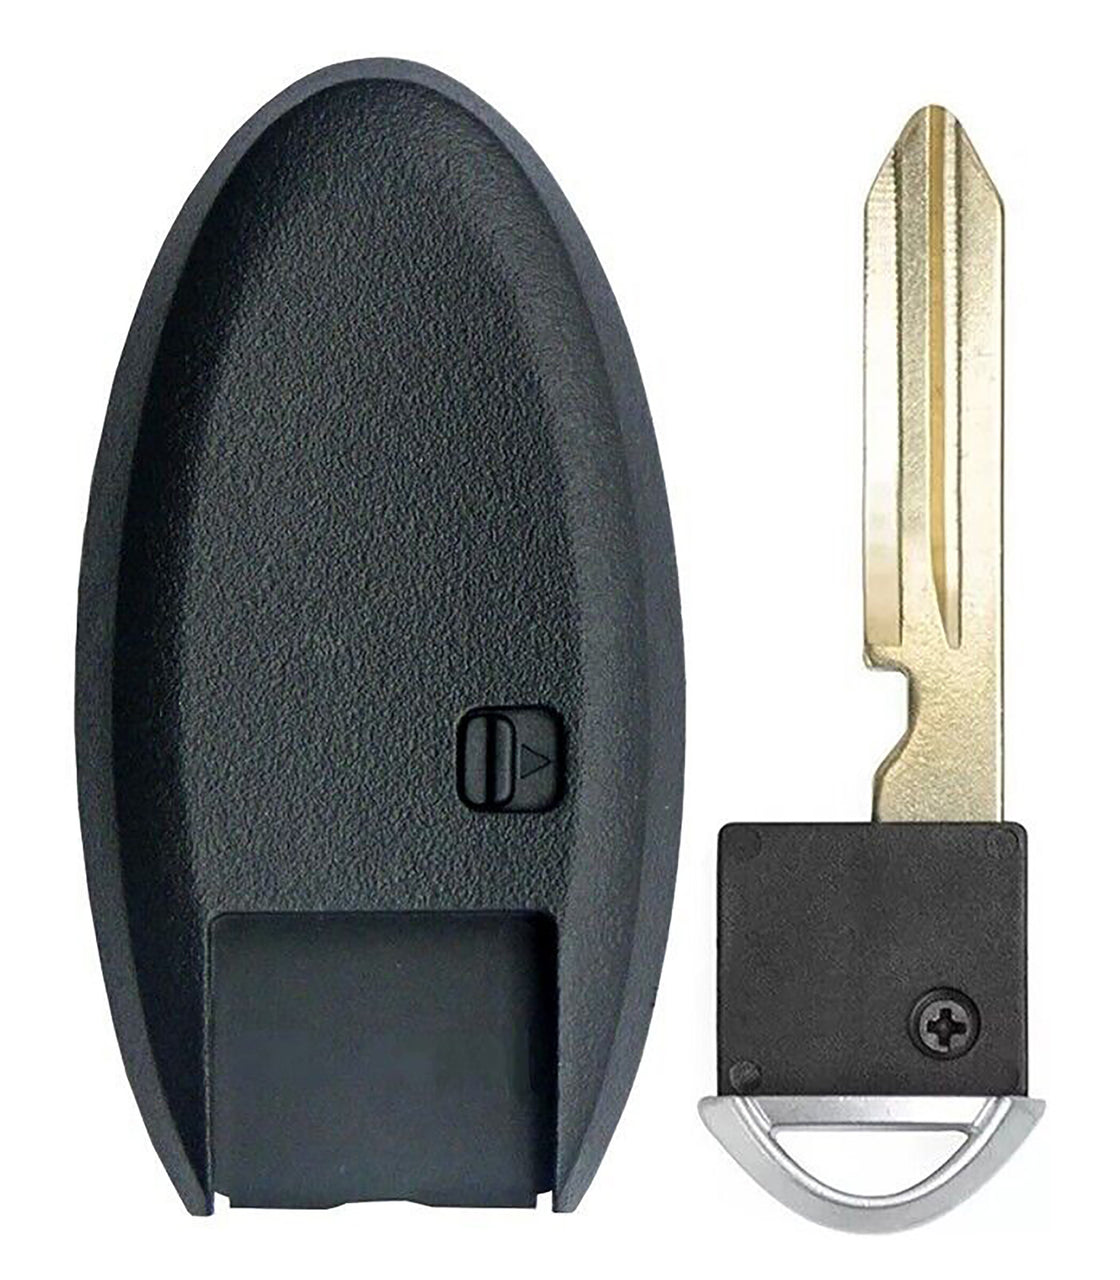 1x New Replacement Proximity Key Fob Compatible with & Fit For Nissan Vehicle. Read Description - MPN CWTWB1U825-02